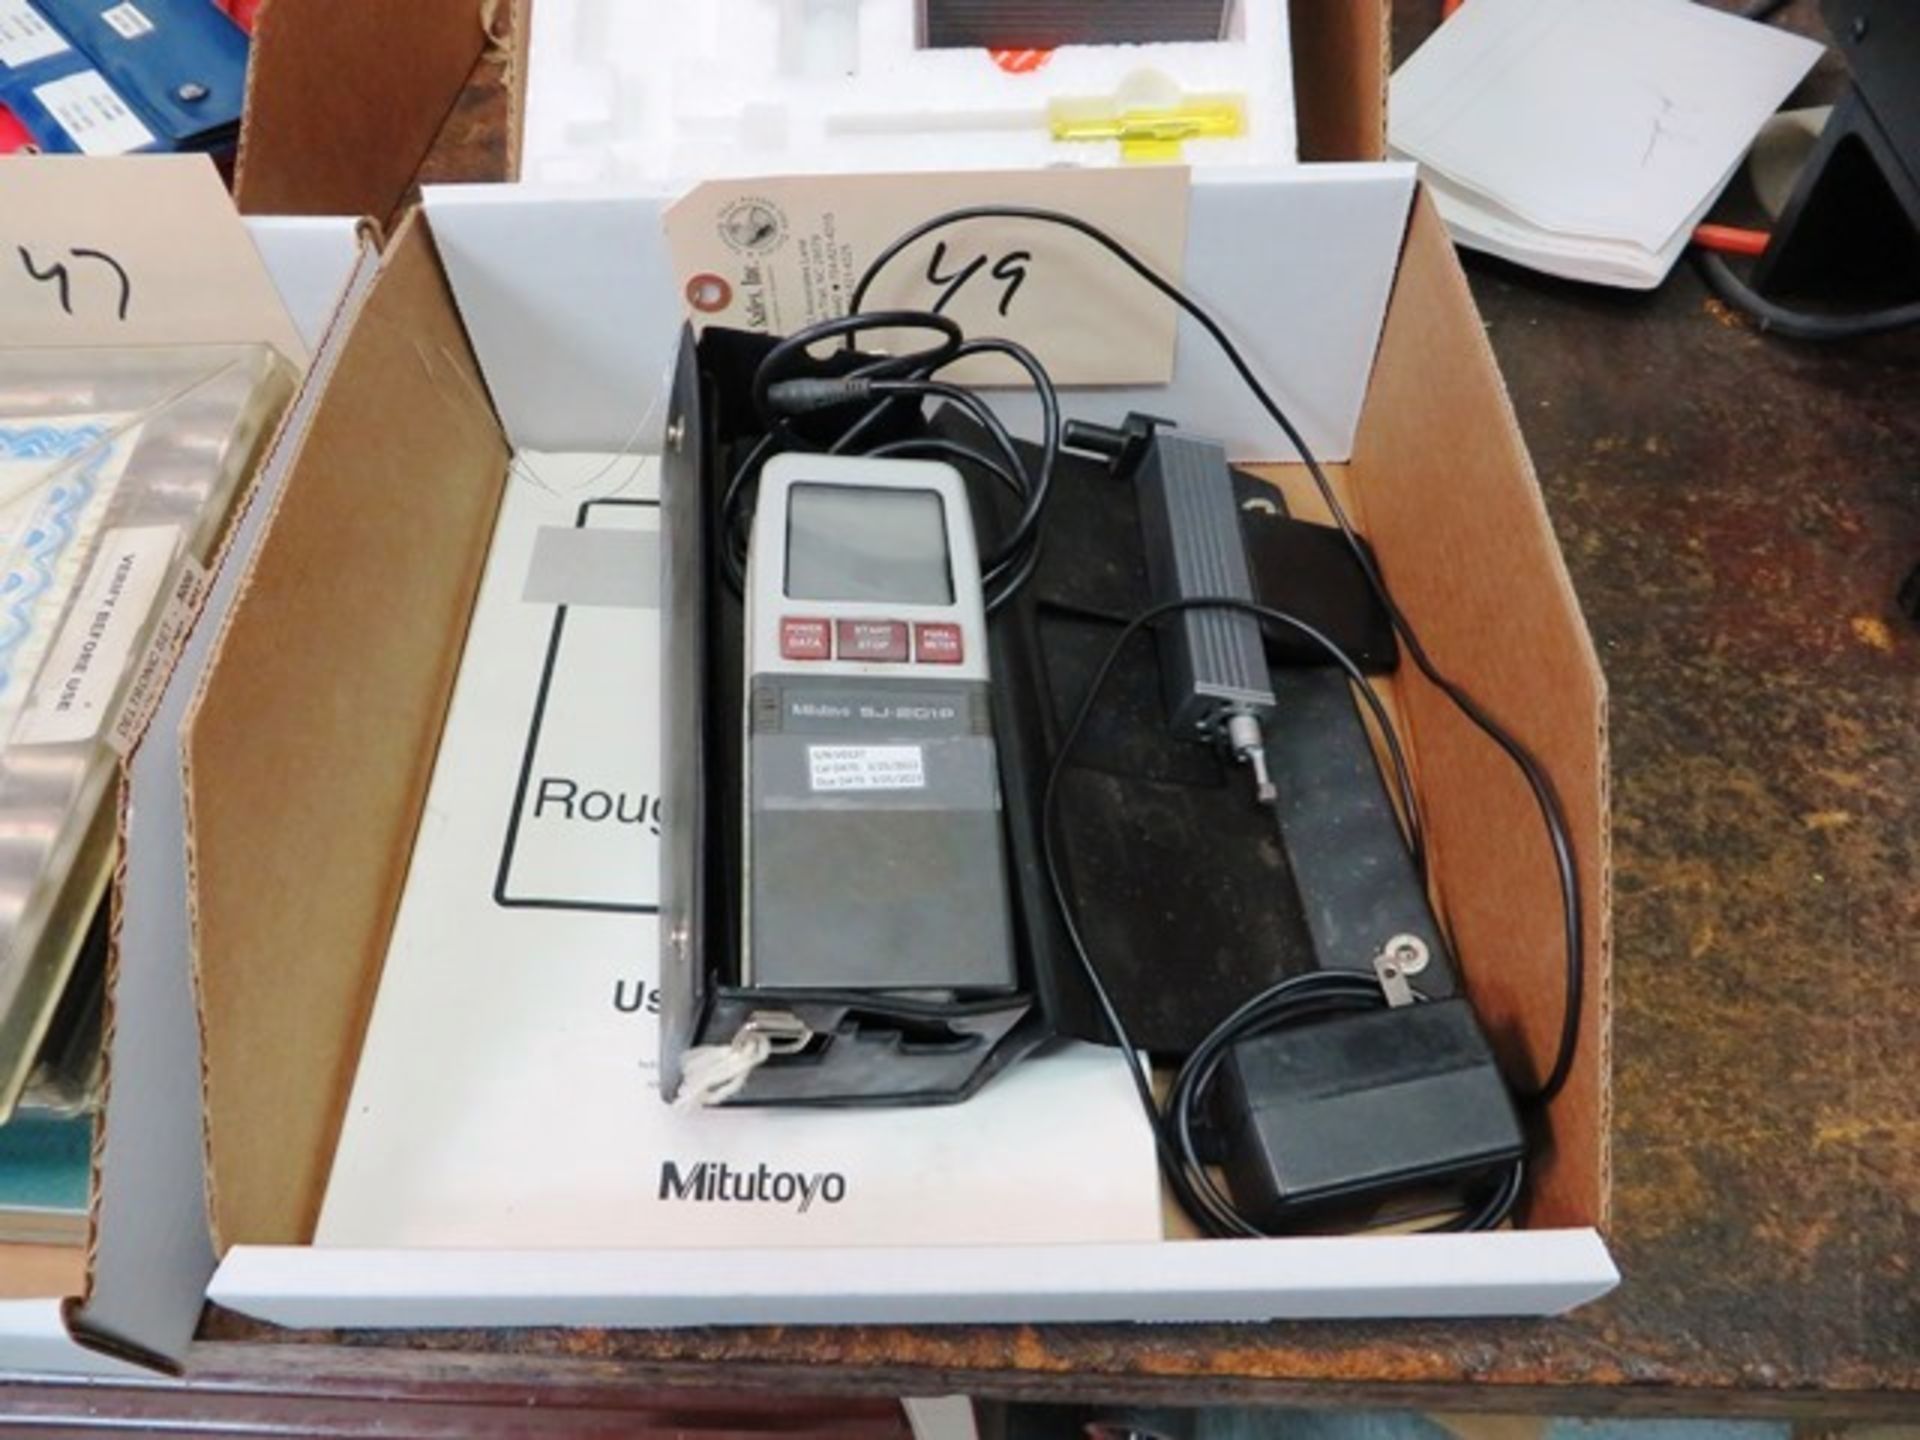 Mitutoyo Model SJ-201P Surface Roughness Tester